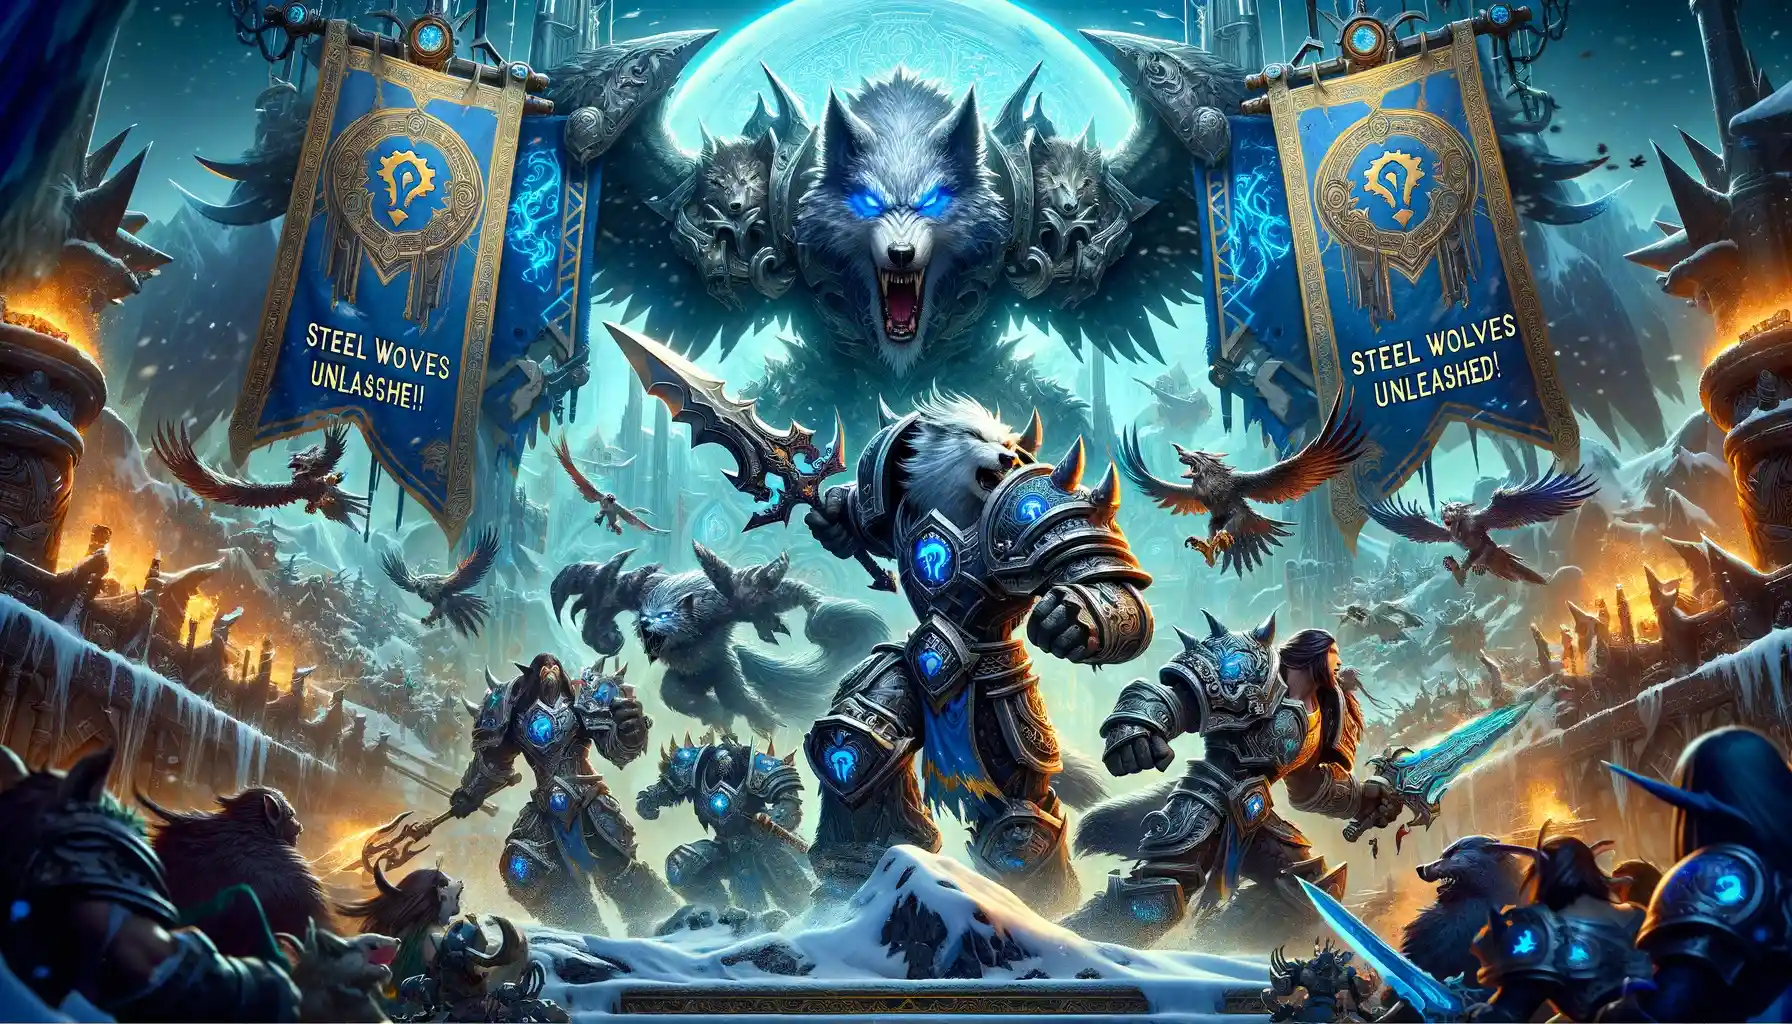 Everything You Need To Know About The Wow Sod Phase 4 Release Date